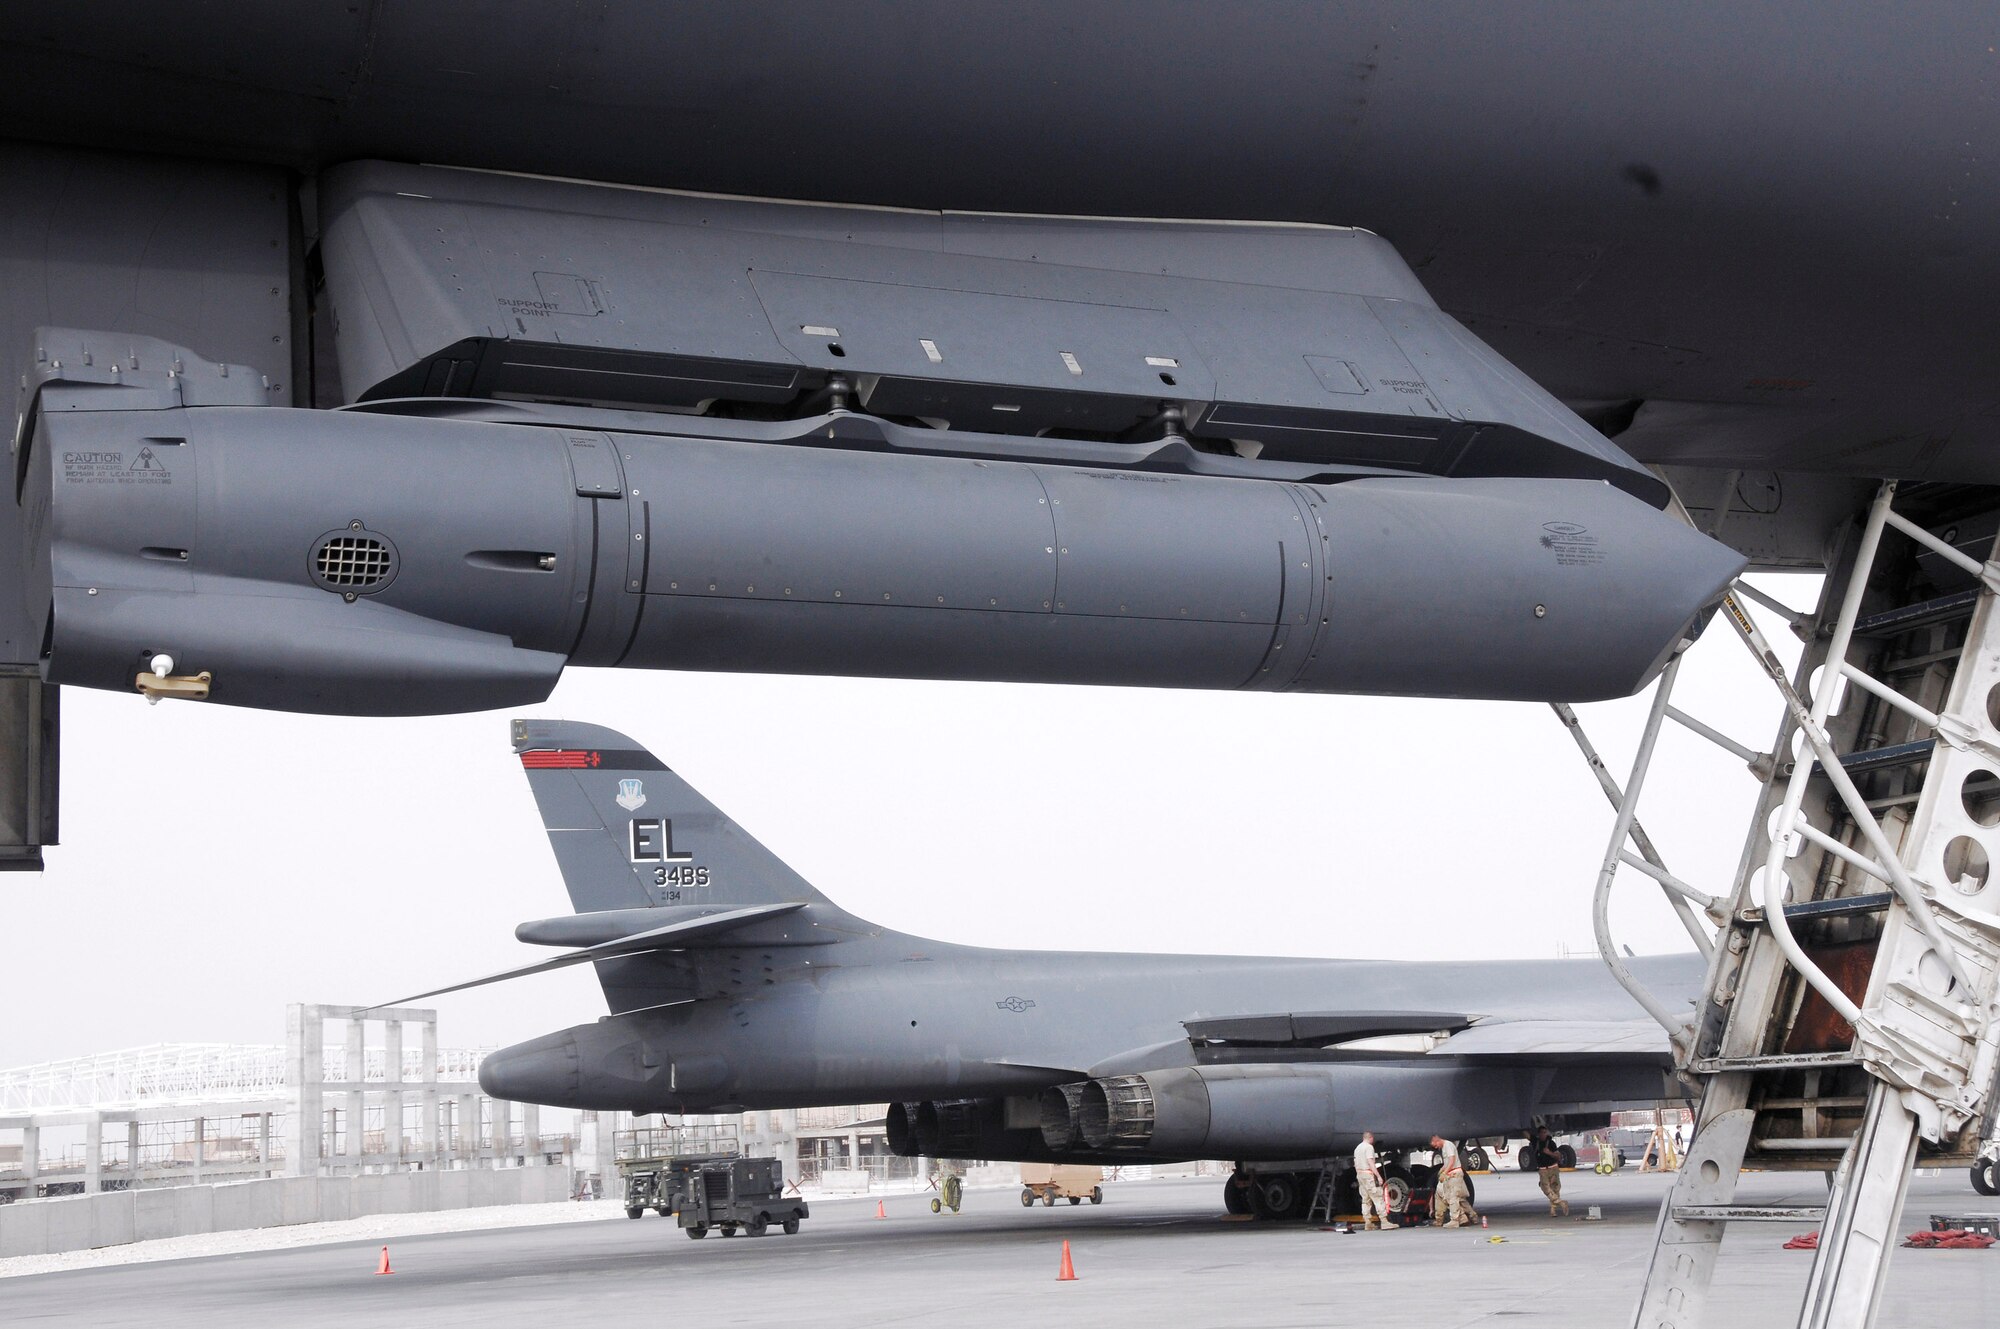 A Sniper Advanced Targeting Pod hangs from the underbelly of a B-1B Lancer after a recent mission in Southwest Asia Aug. 5. The Sniper ATP provides enhanced target identification for aircrew, allowing them to detect and analyze targets on the ground via real-time imagery. (U.S. Air Force photo/Staff Sgt. Darnell Cannady) 
